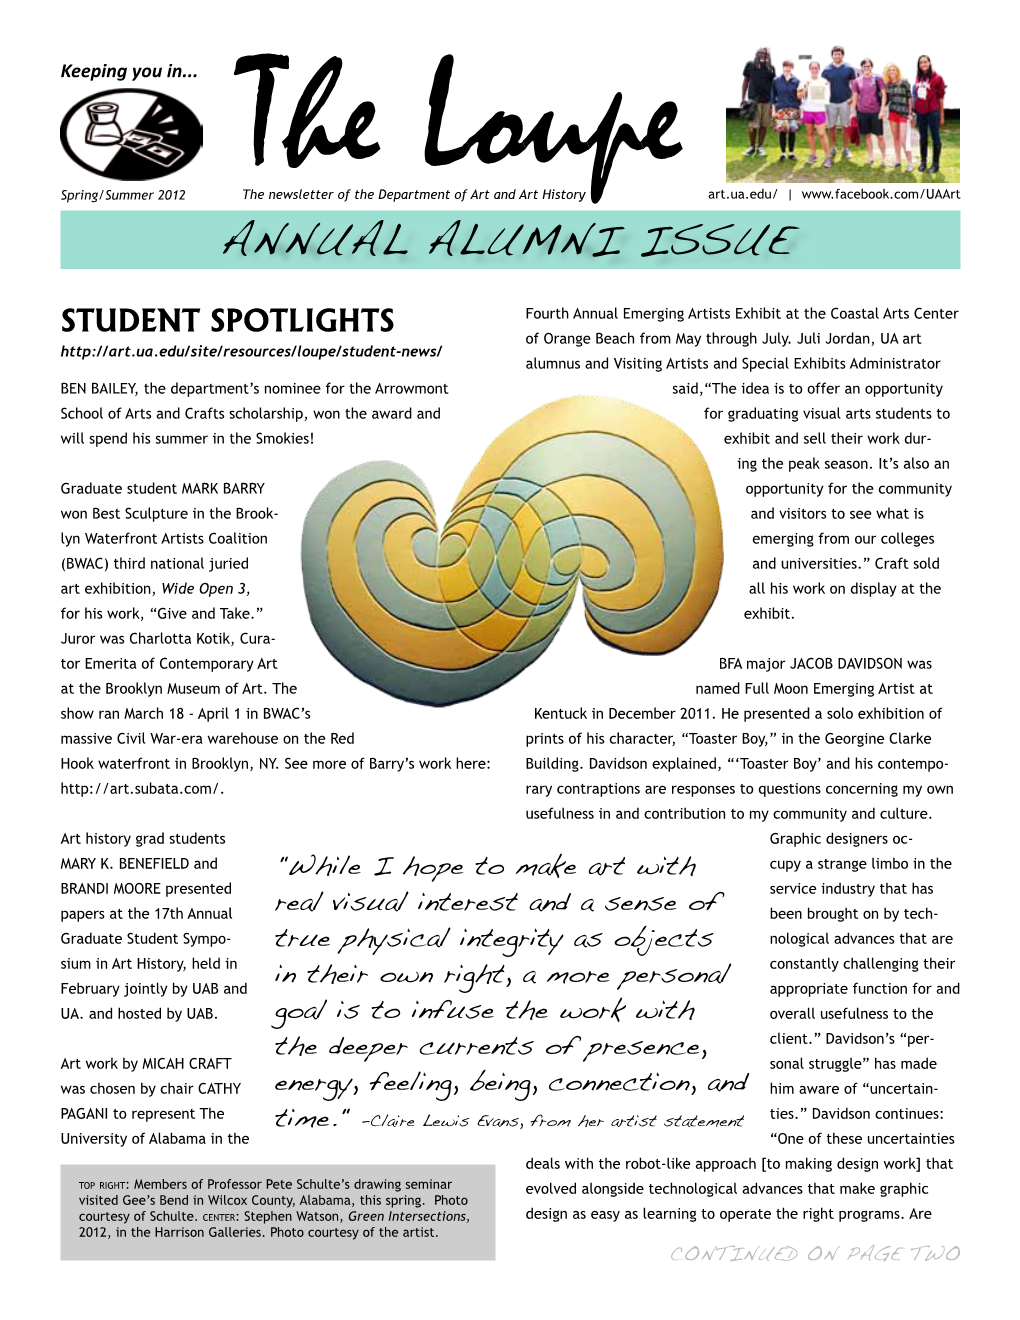 Spring/Summer 2012 the Newsletter of the Department Loupe of Art and Art History Art.Ua.Edu/ | ANNUAL ALUMNI ISSUE